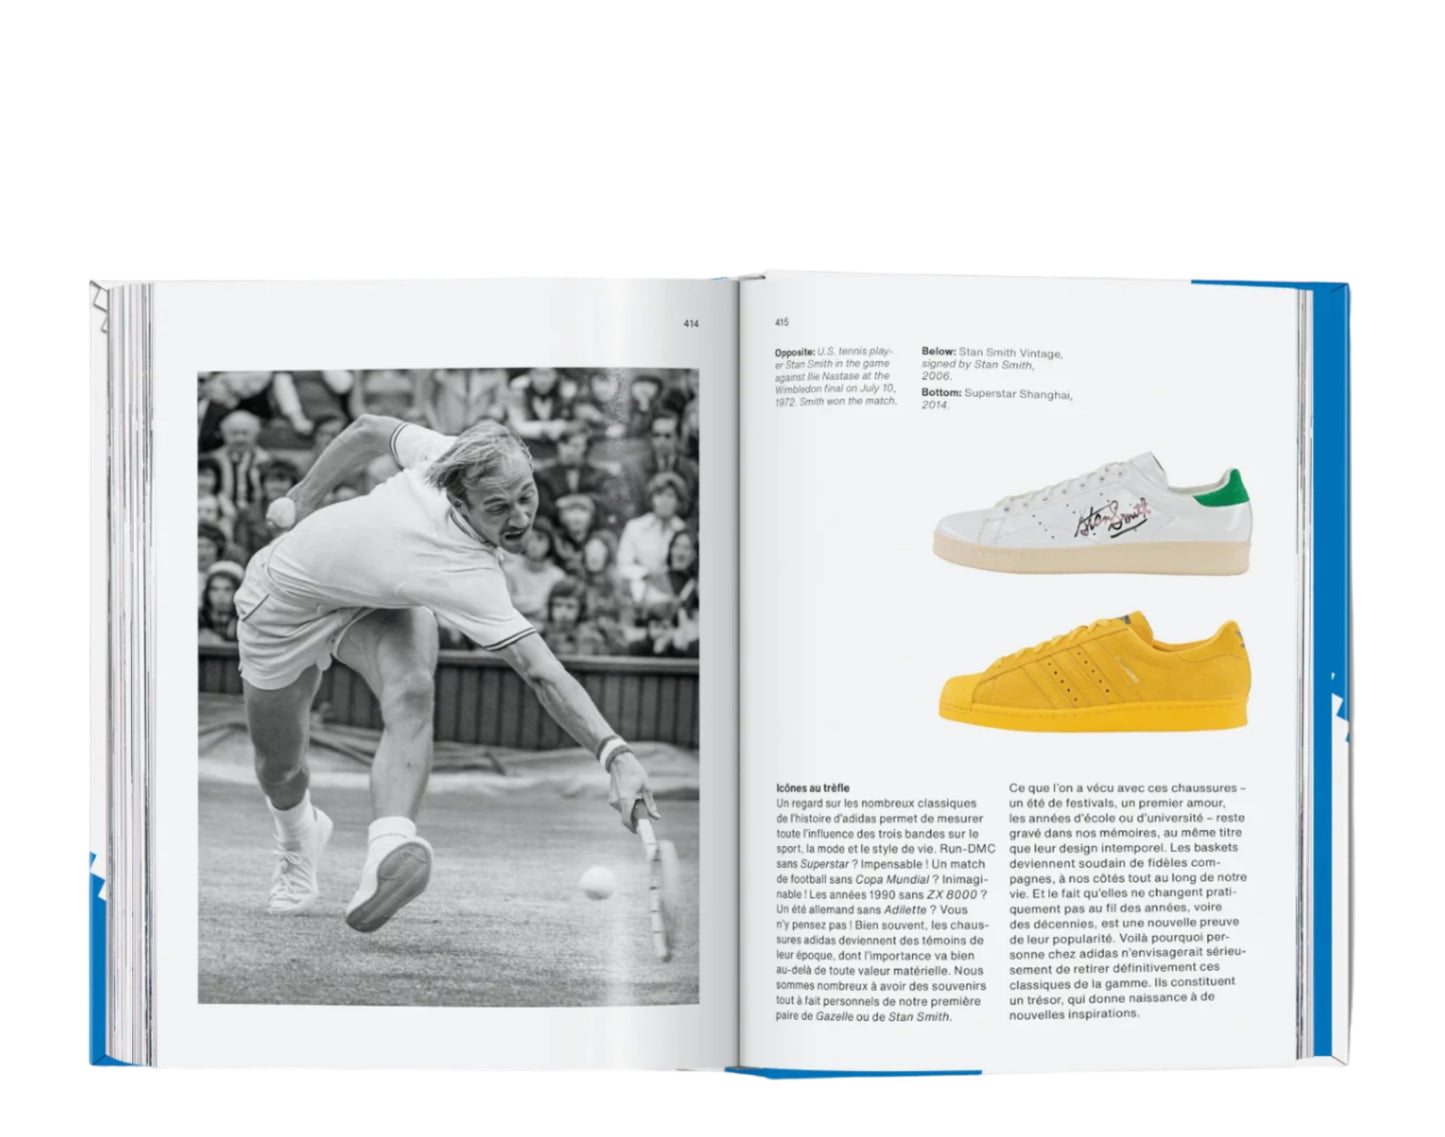 Taschen Books - The adidas Archive. The Footwear Collection. 40th Anniversary Edition Hard Cover Book